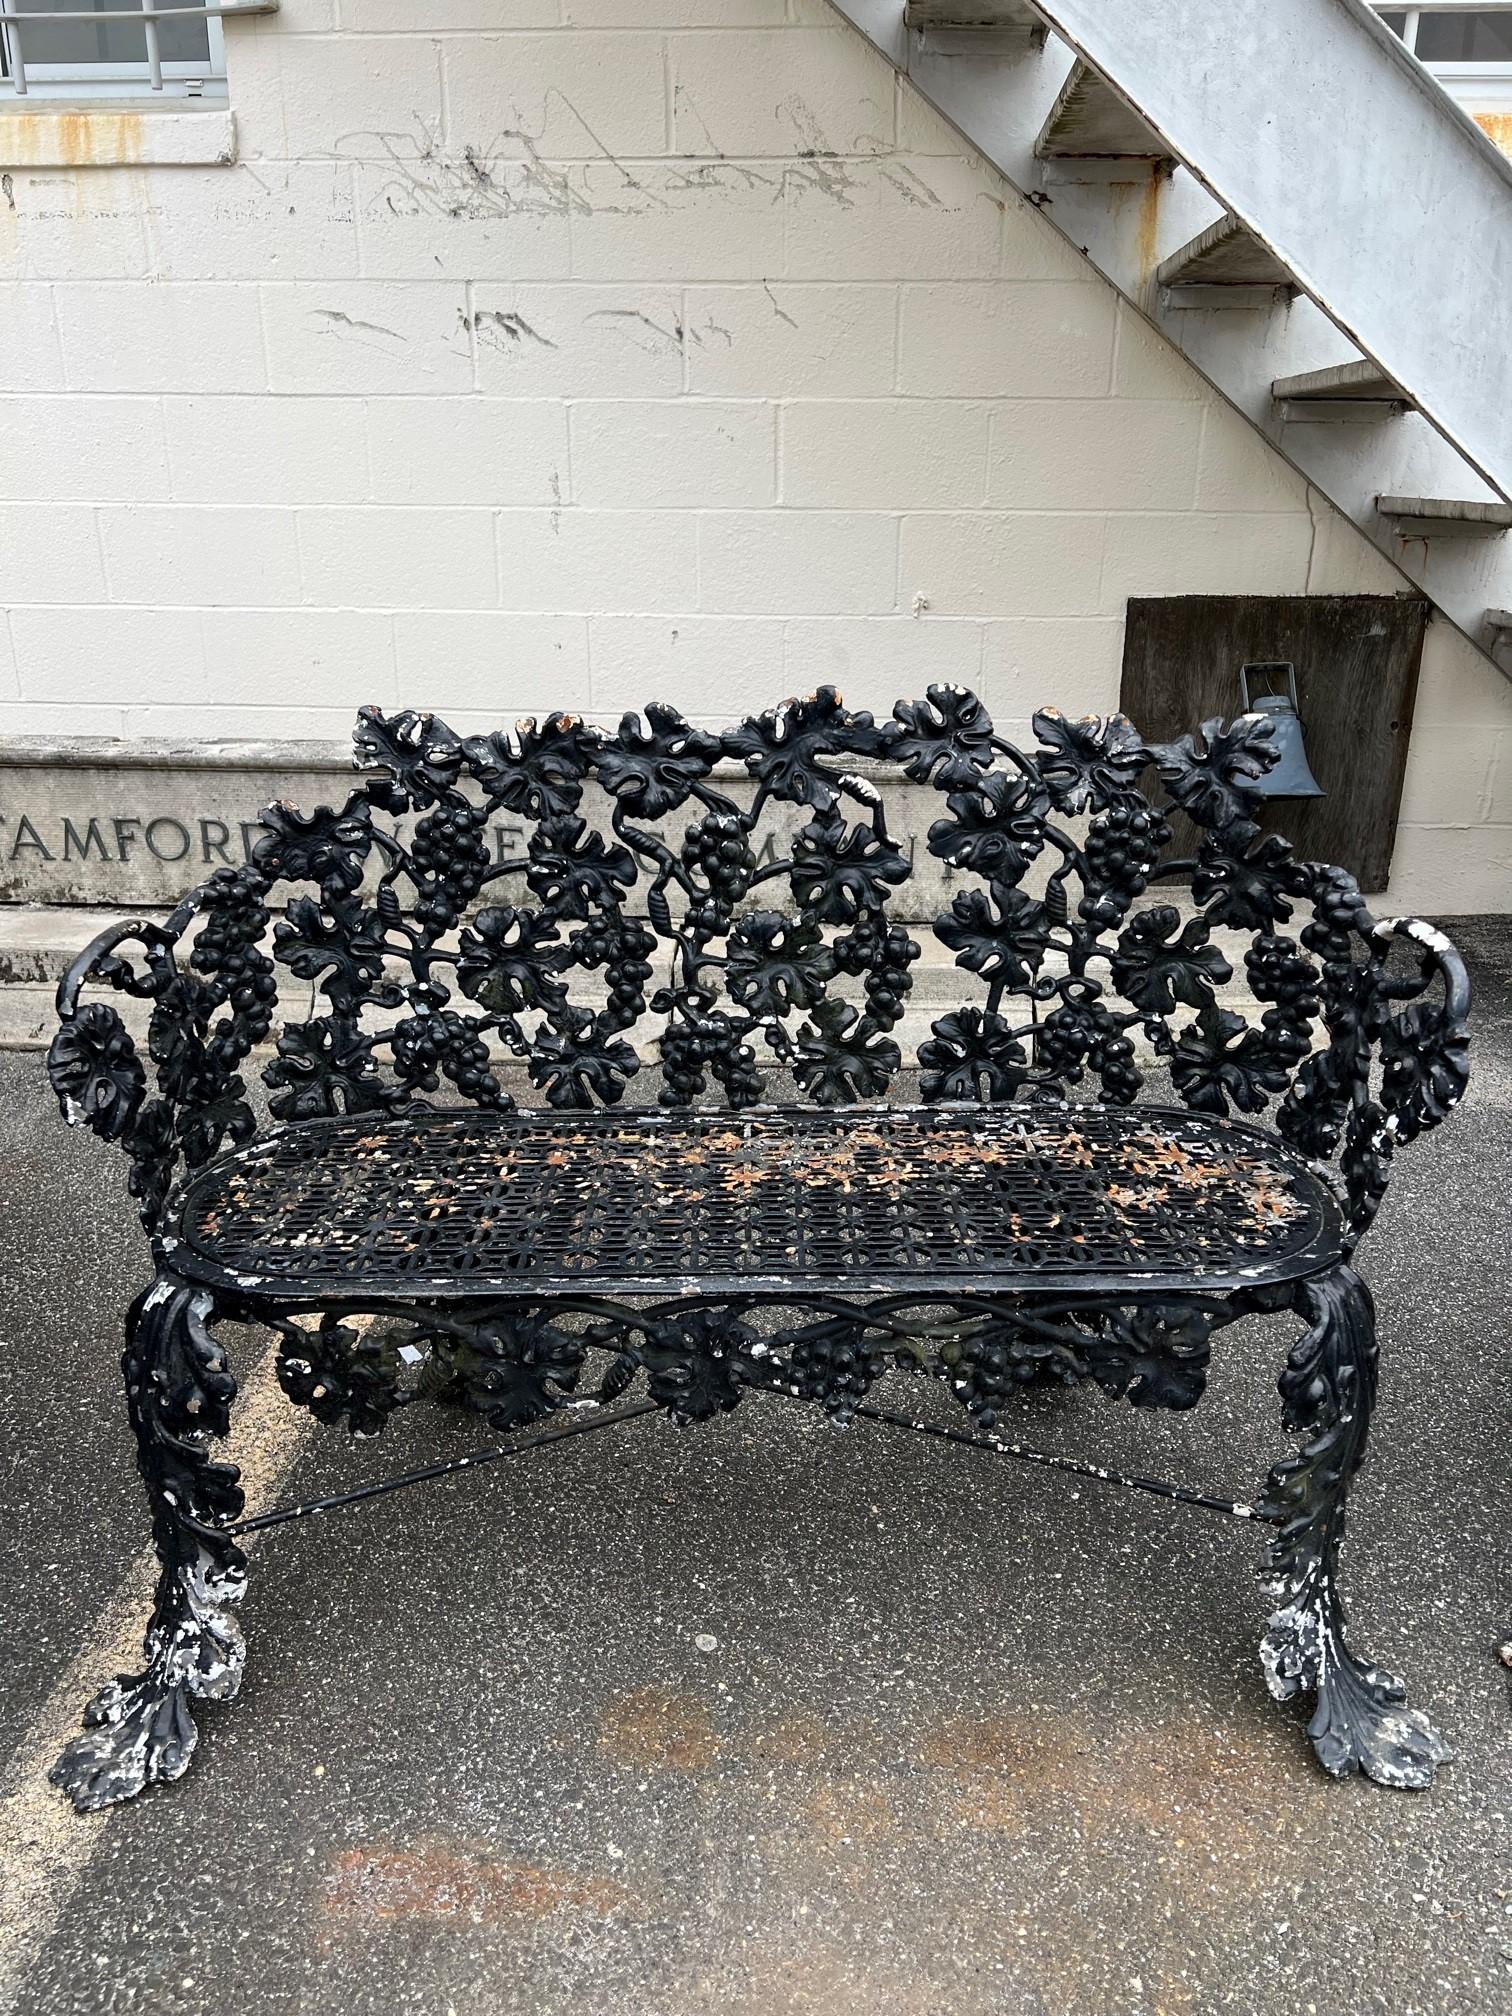 Early 20th century pair of Antique French Victorian grapevine leaf cast iron garden benches. Nice pair of antique benches in good condition very sturdy no missing pieces. This pair of benches is from the early 1900s notice the cross bars and screws